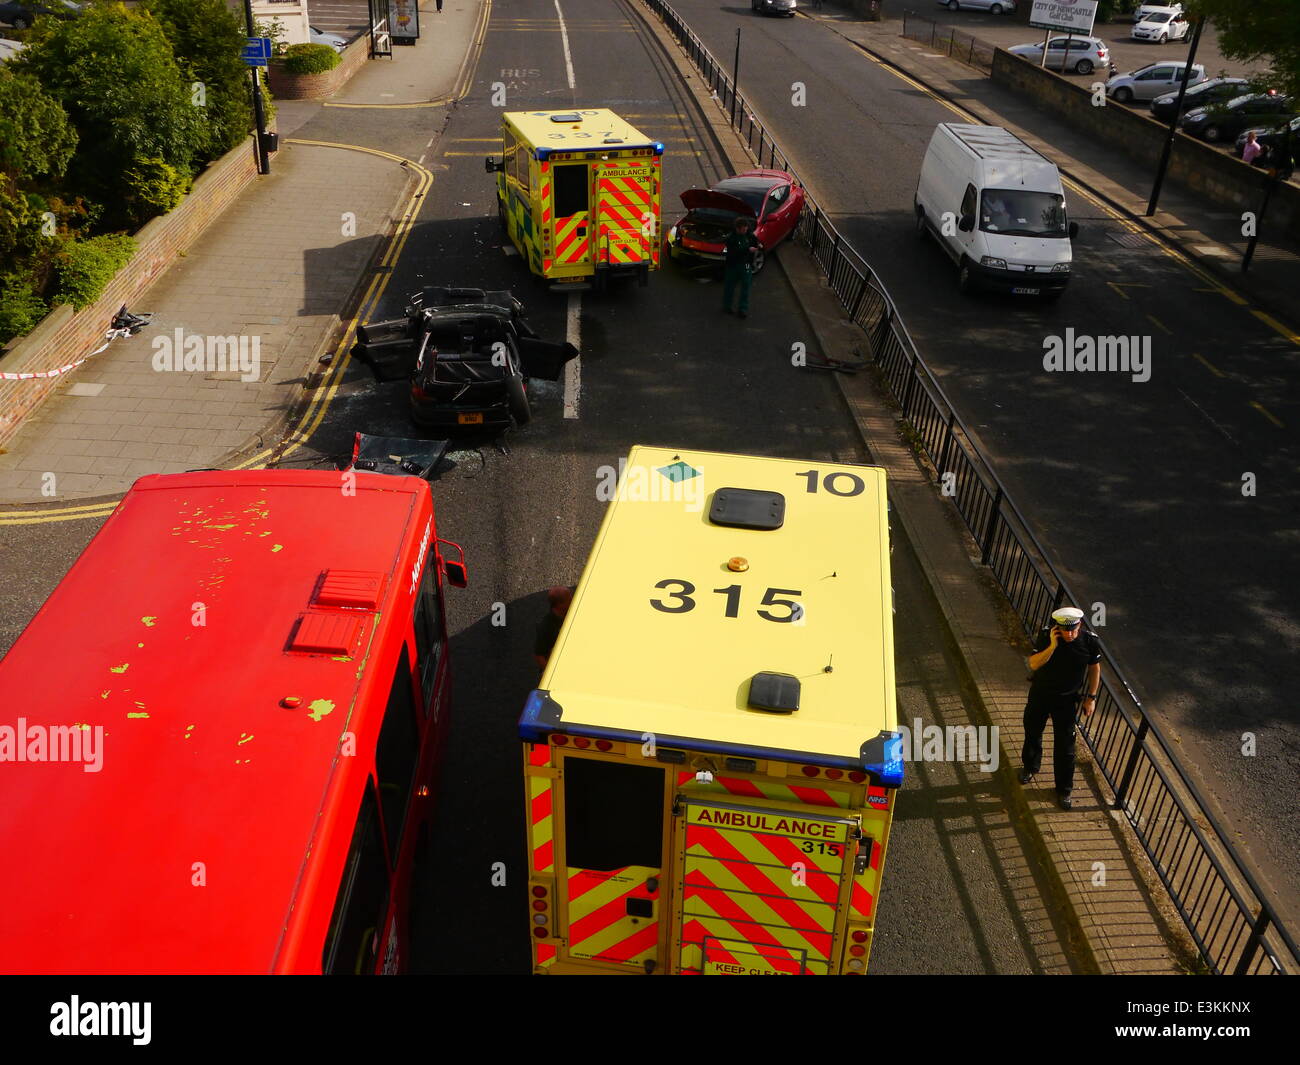 Three Mile Bridge, Great North Road, Gosforth, Newcastle upon Tyne, UK. 24th June 2014.   Serious RTA involving two cars causes major traffic chaos in surrounding area.  Drivers of both cars injured and taken to hospital by ambulance.  Credit:  Victor W Adams / Alamy Live News; Stock Photo